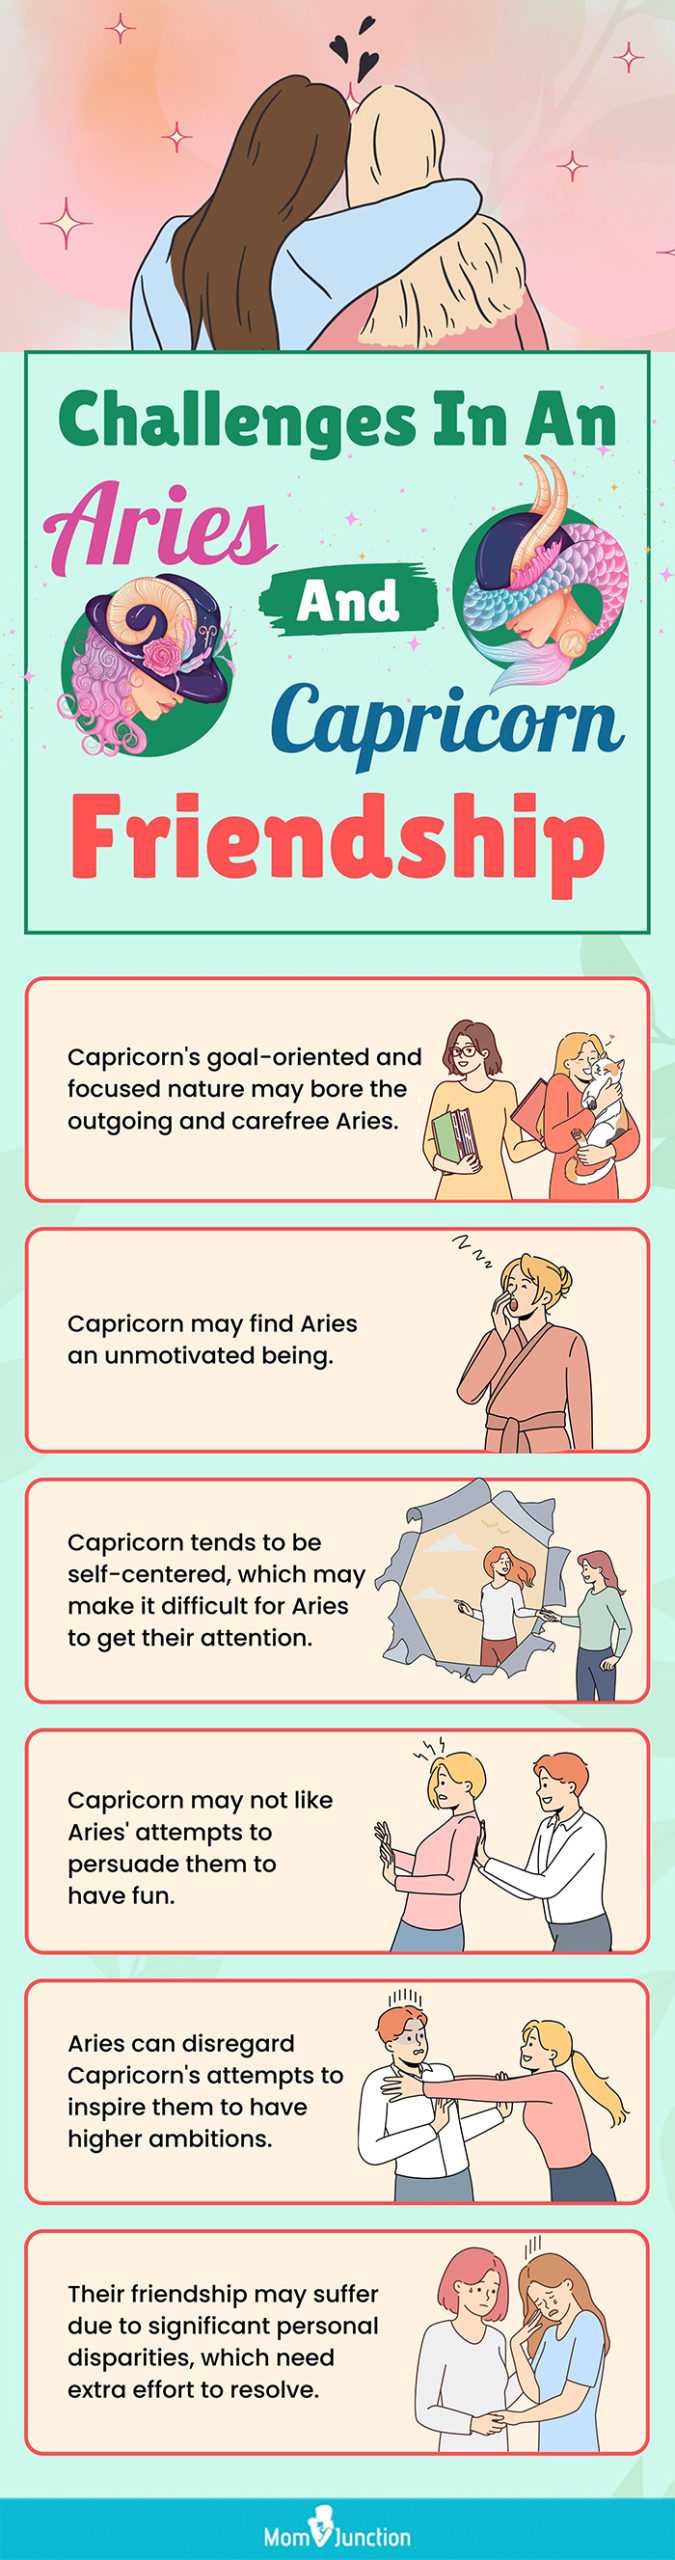 challenges in an aries and capricorn friendship (infographic)